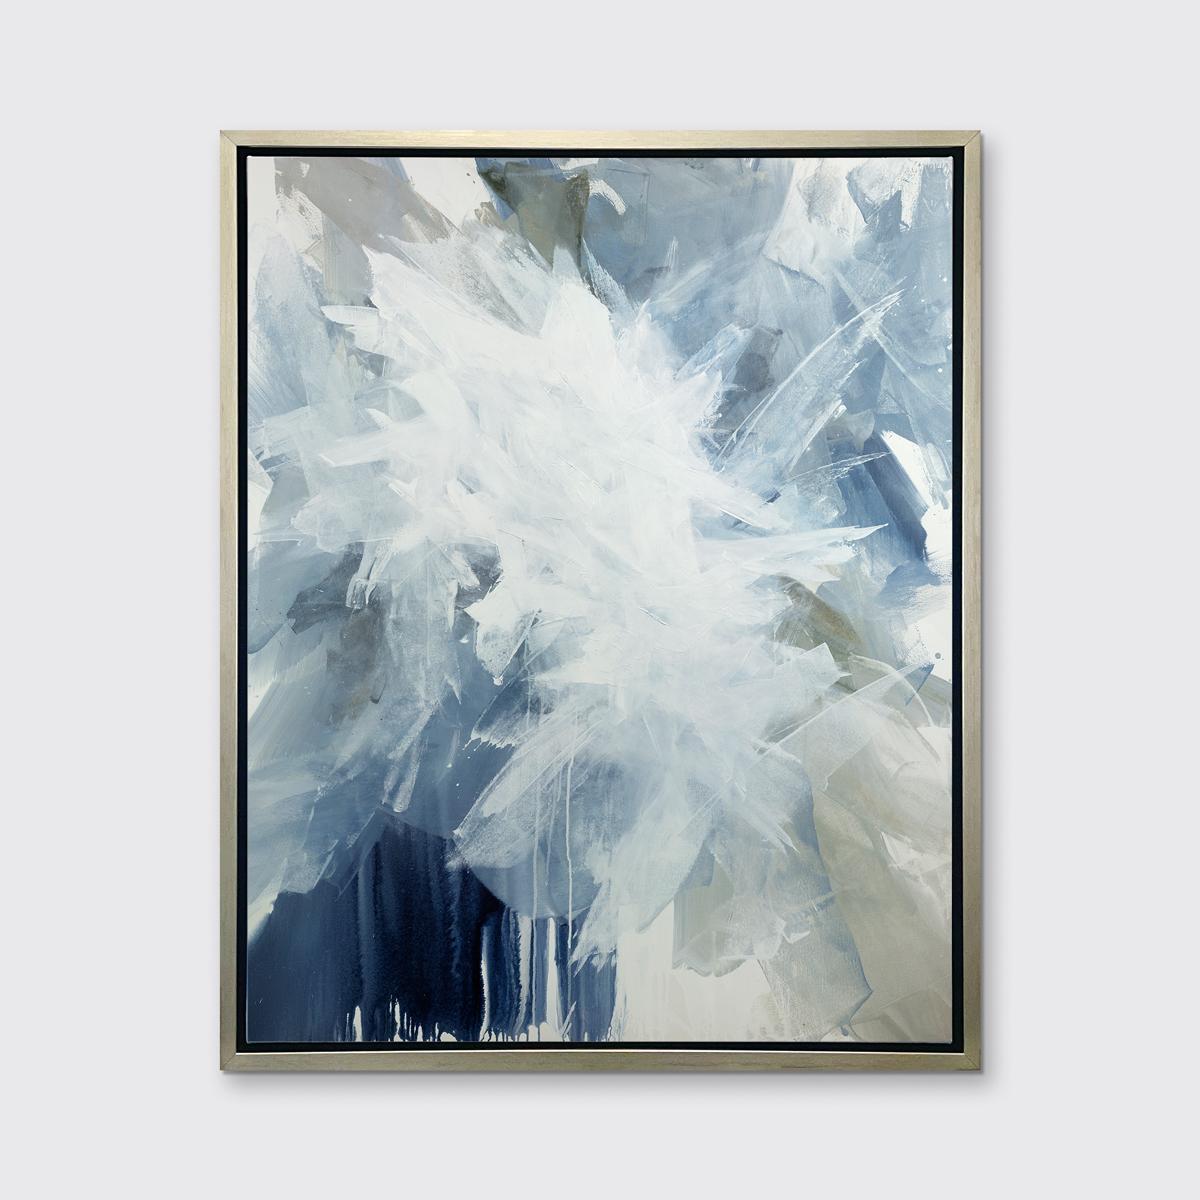 This contemporary limited edition print by Teodora Guererra features large, energetic strokes of varying blue tines which blend with a warm neutral greige and white overtop, adding depth and dimension to the abstract composition. 

This Limited